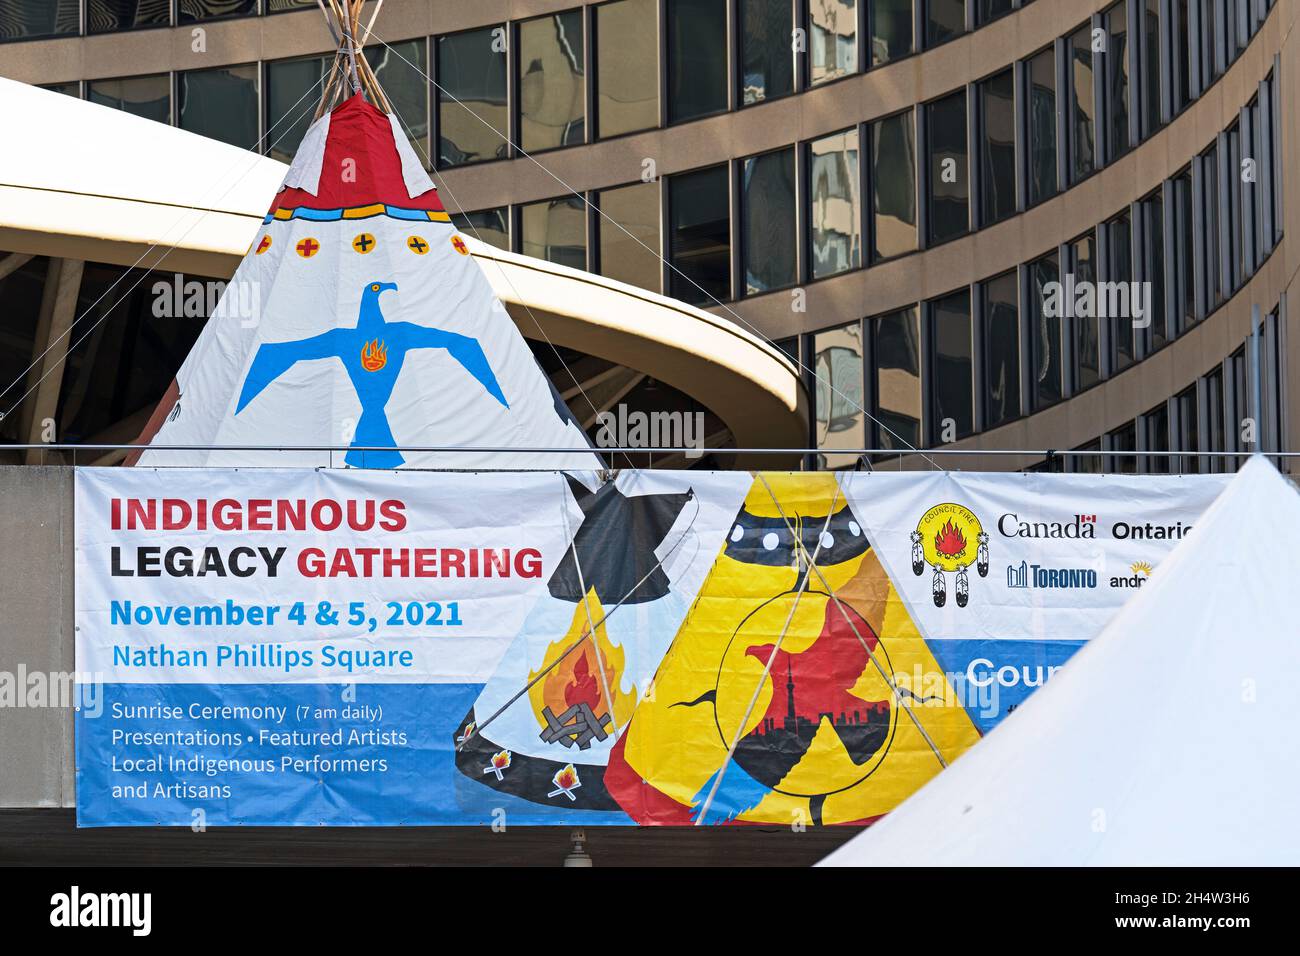 Sign, Banner, Indigenous Legacy Gathering, il 4 novembre 2021 a Toronto, Nathan Phillips Square, Canada Foto Stock